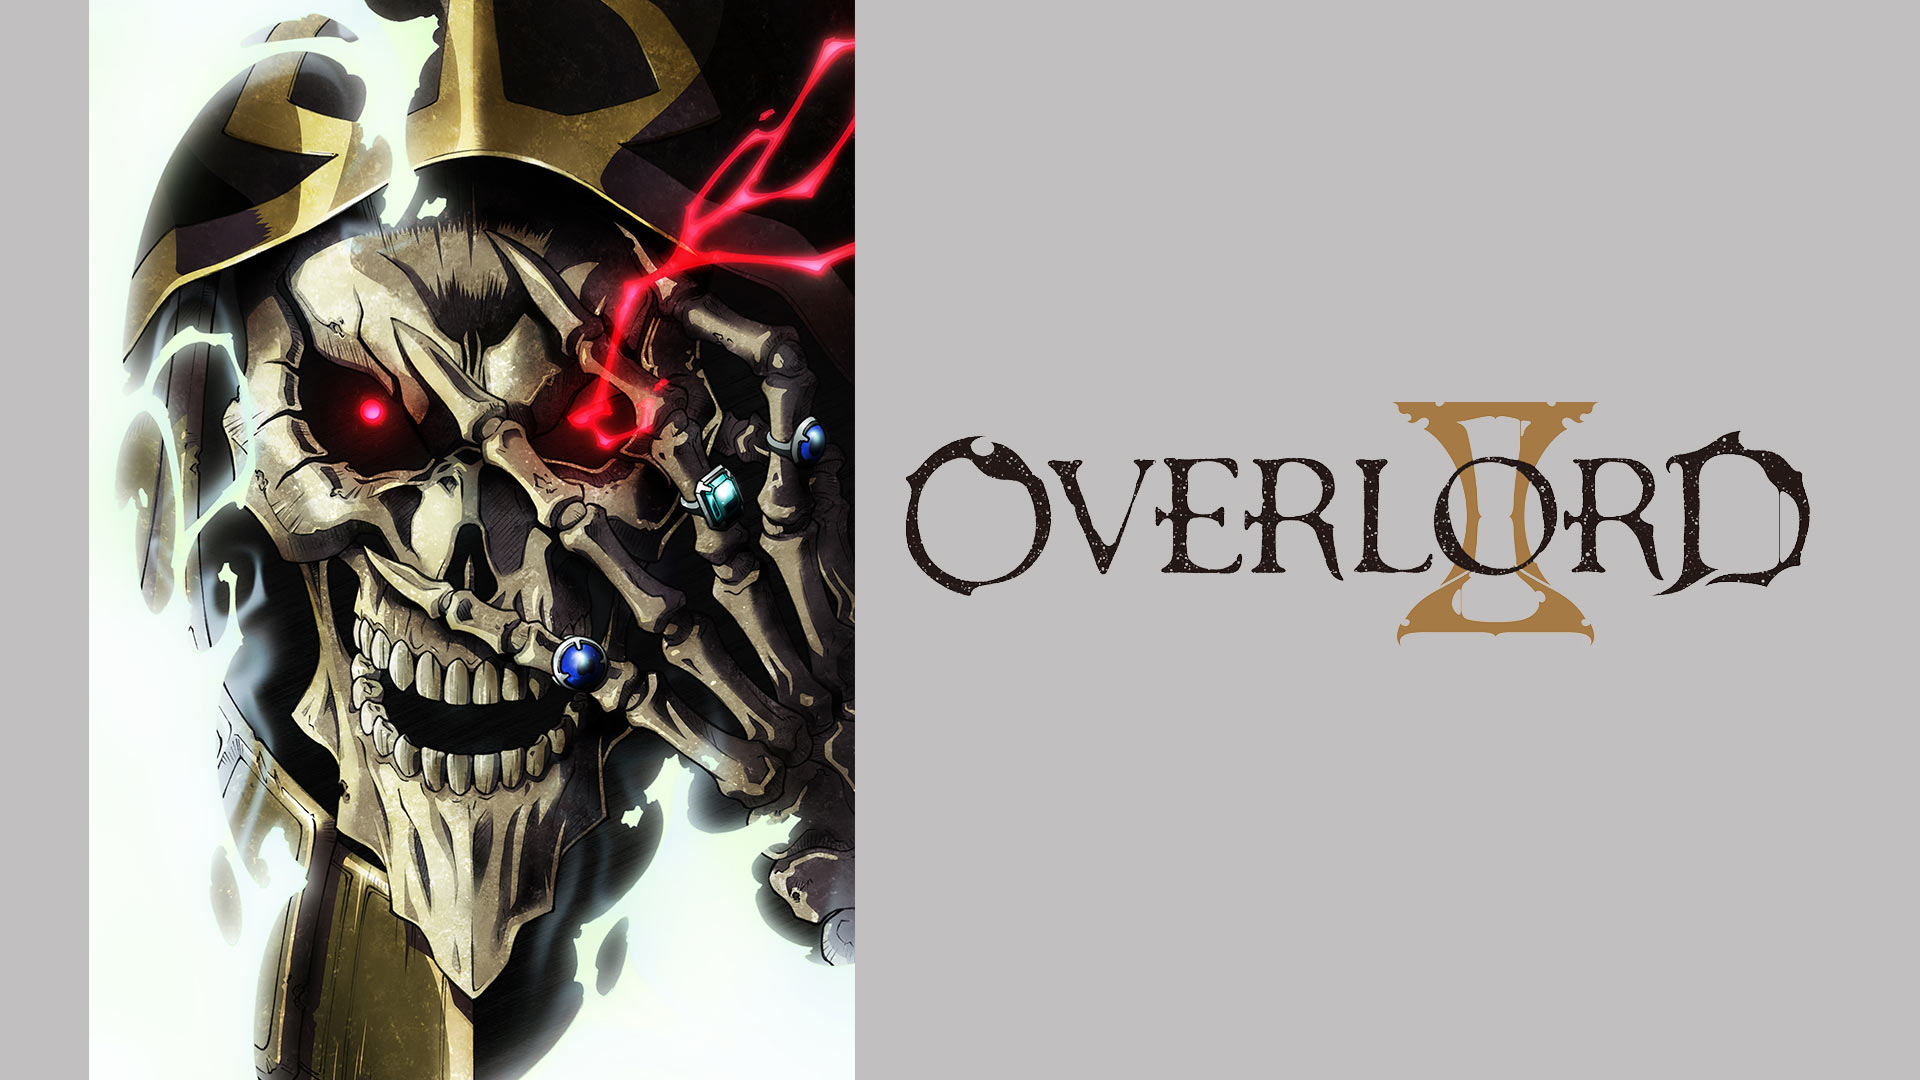 Watch Overlord Episode 1 Online - End and Beginning